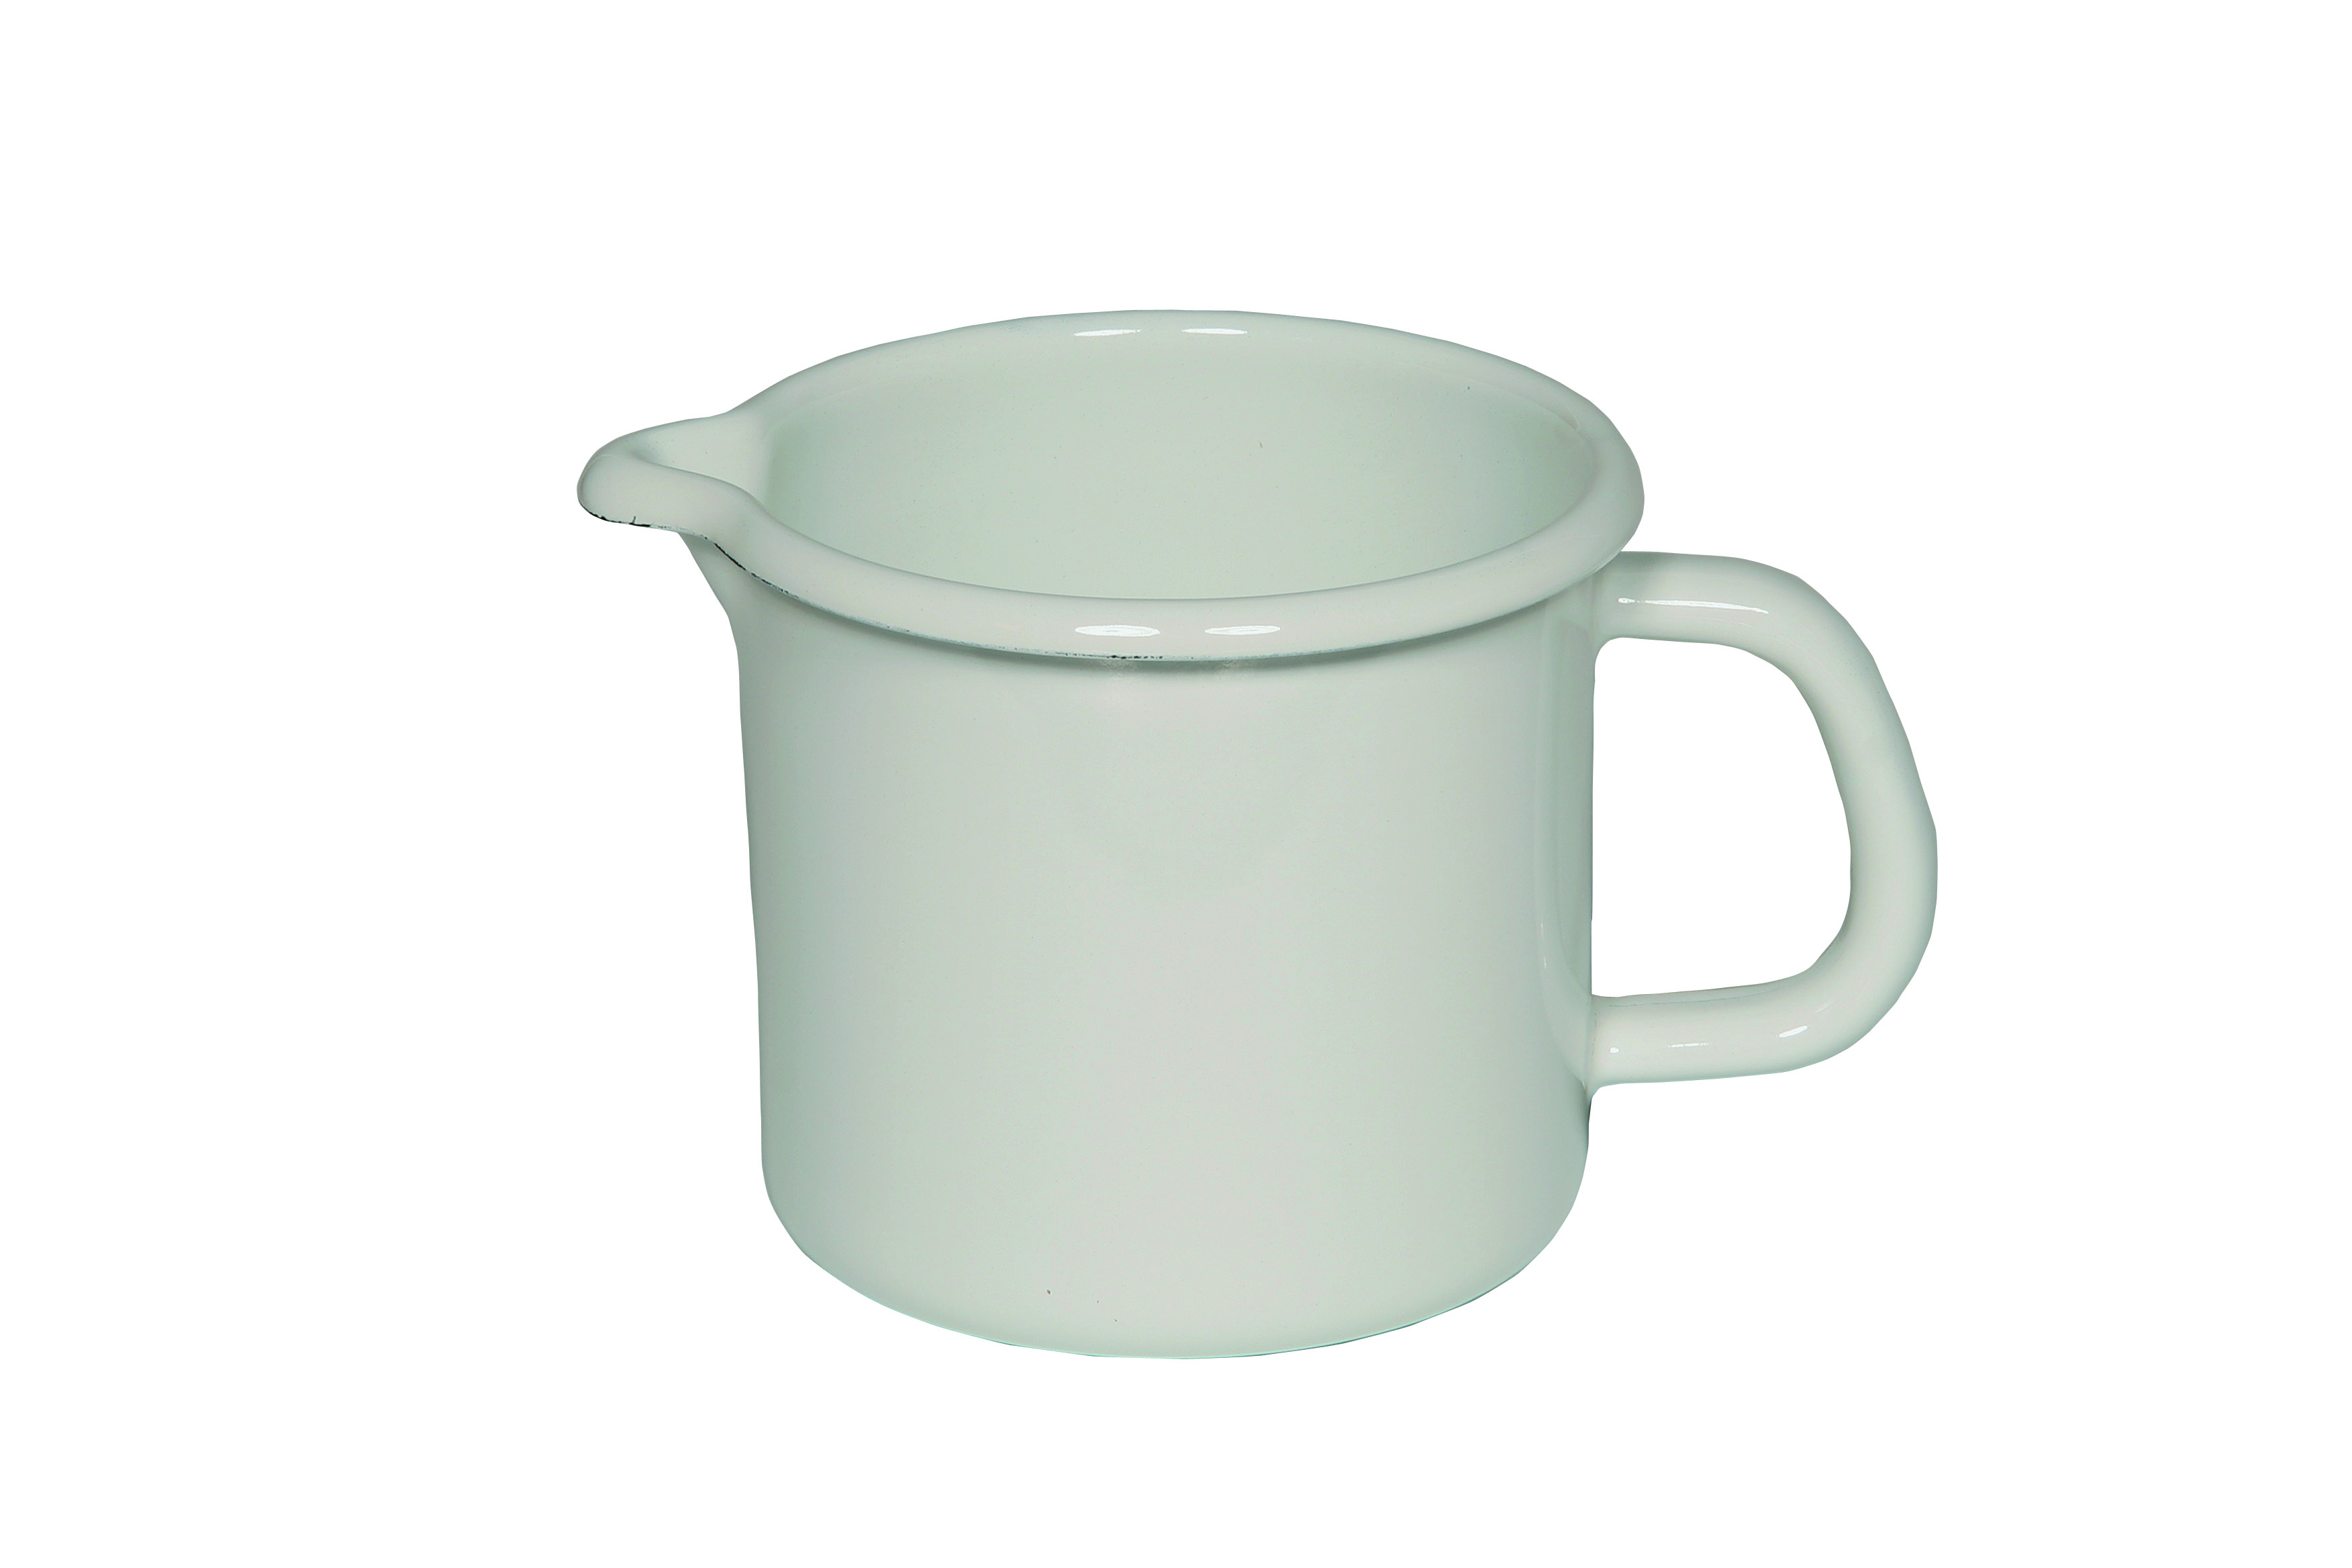 Riess Classic Weiß Schnabeltopf 16 cm / 2,0 Ltr / aus Emaille